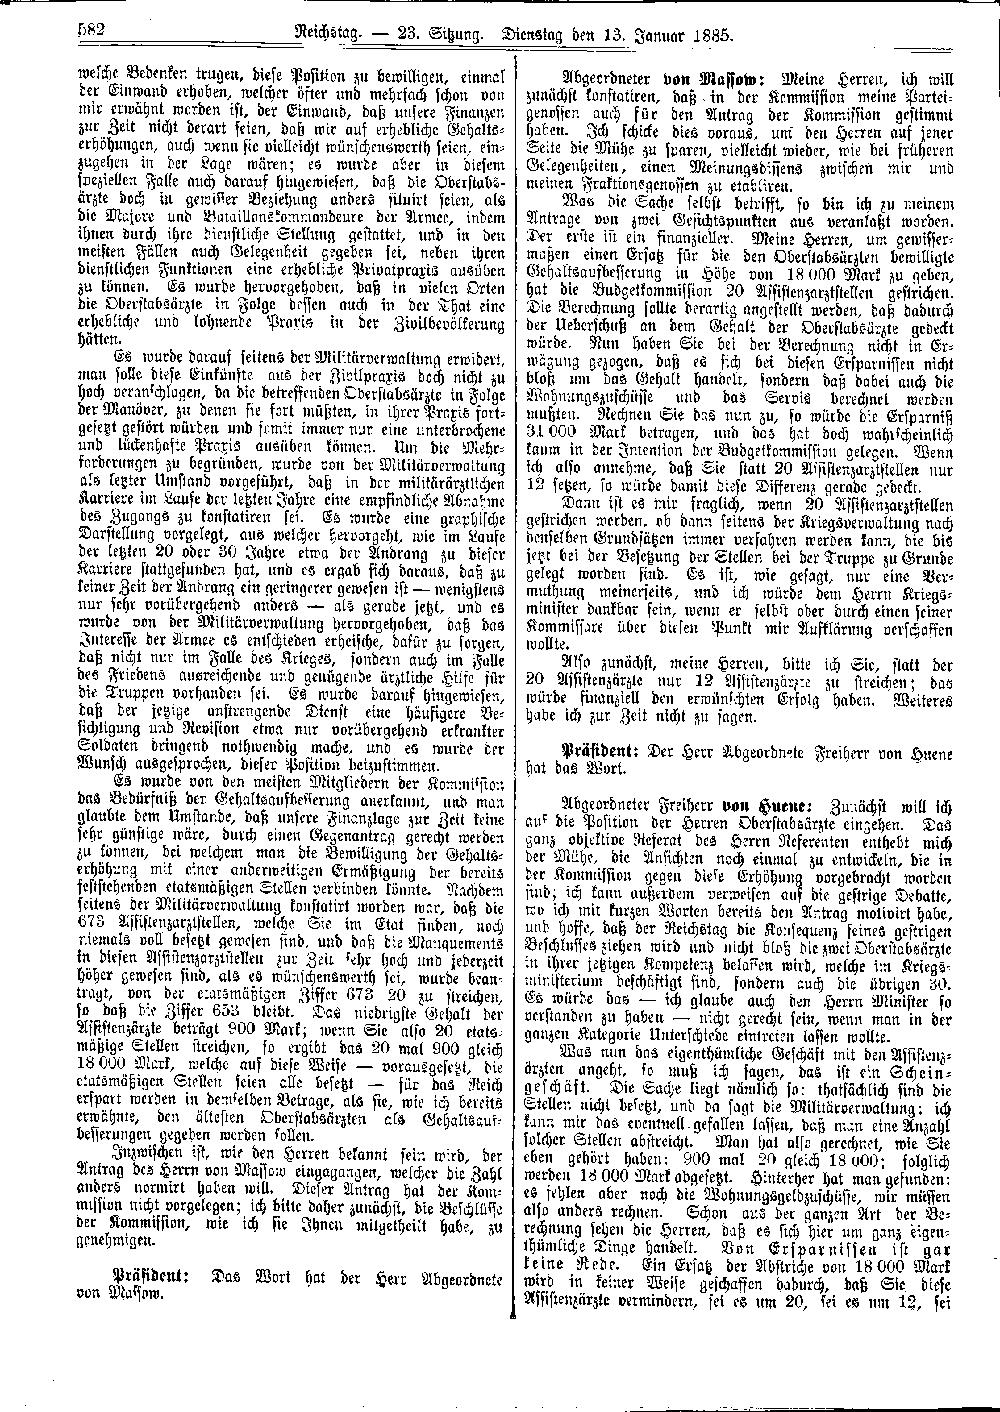 Scan of page 582